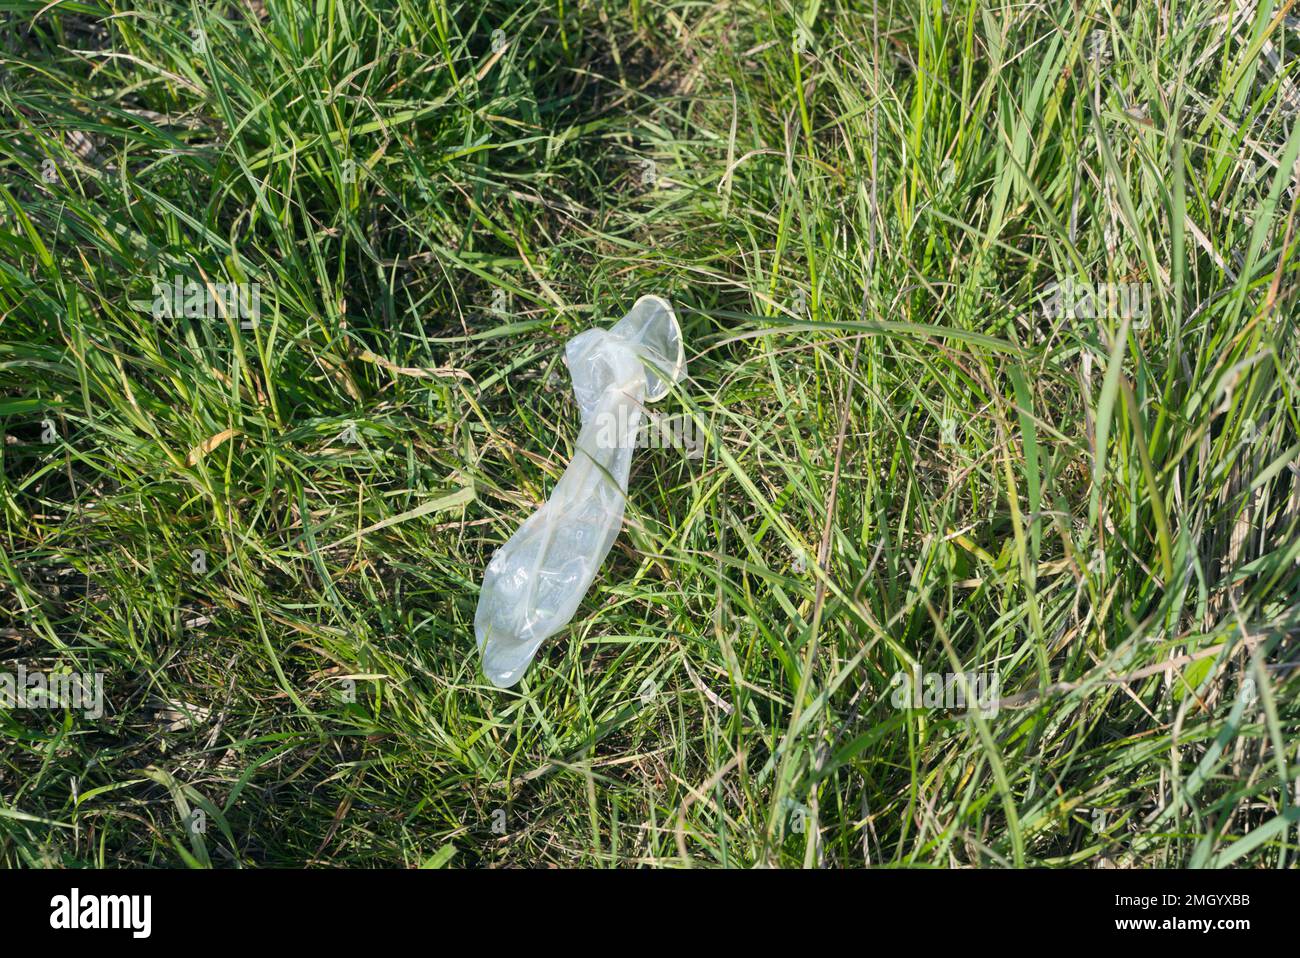 A discarded condom lays in the grass Stock Photo